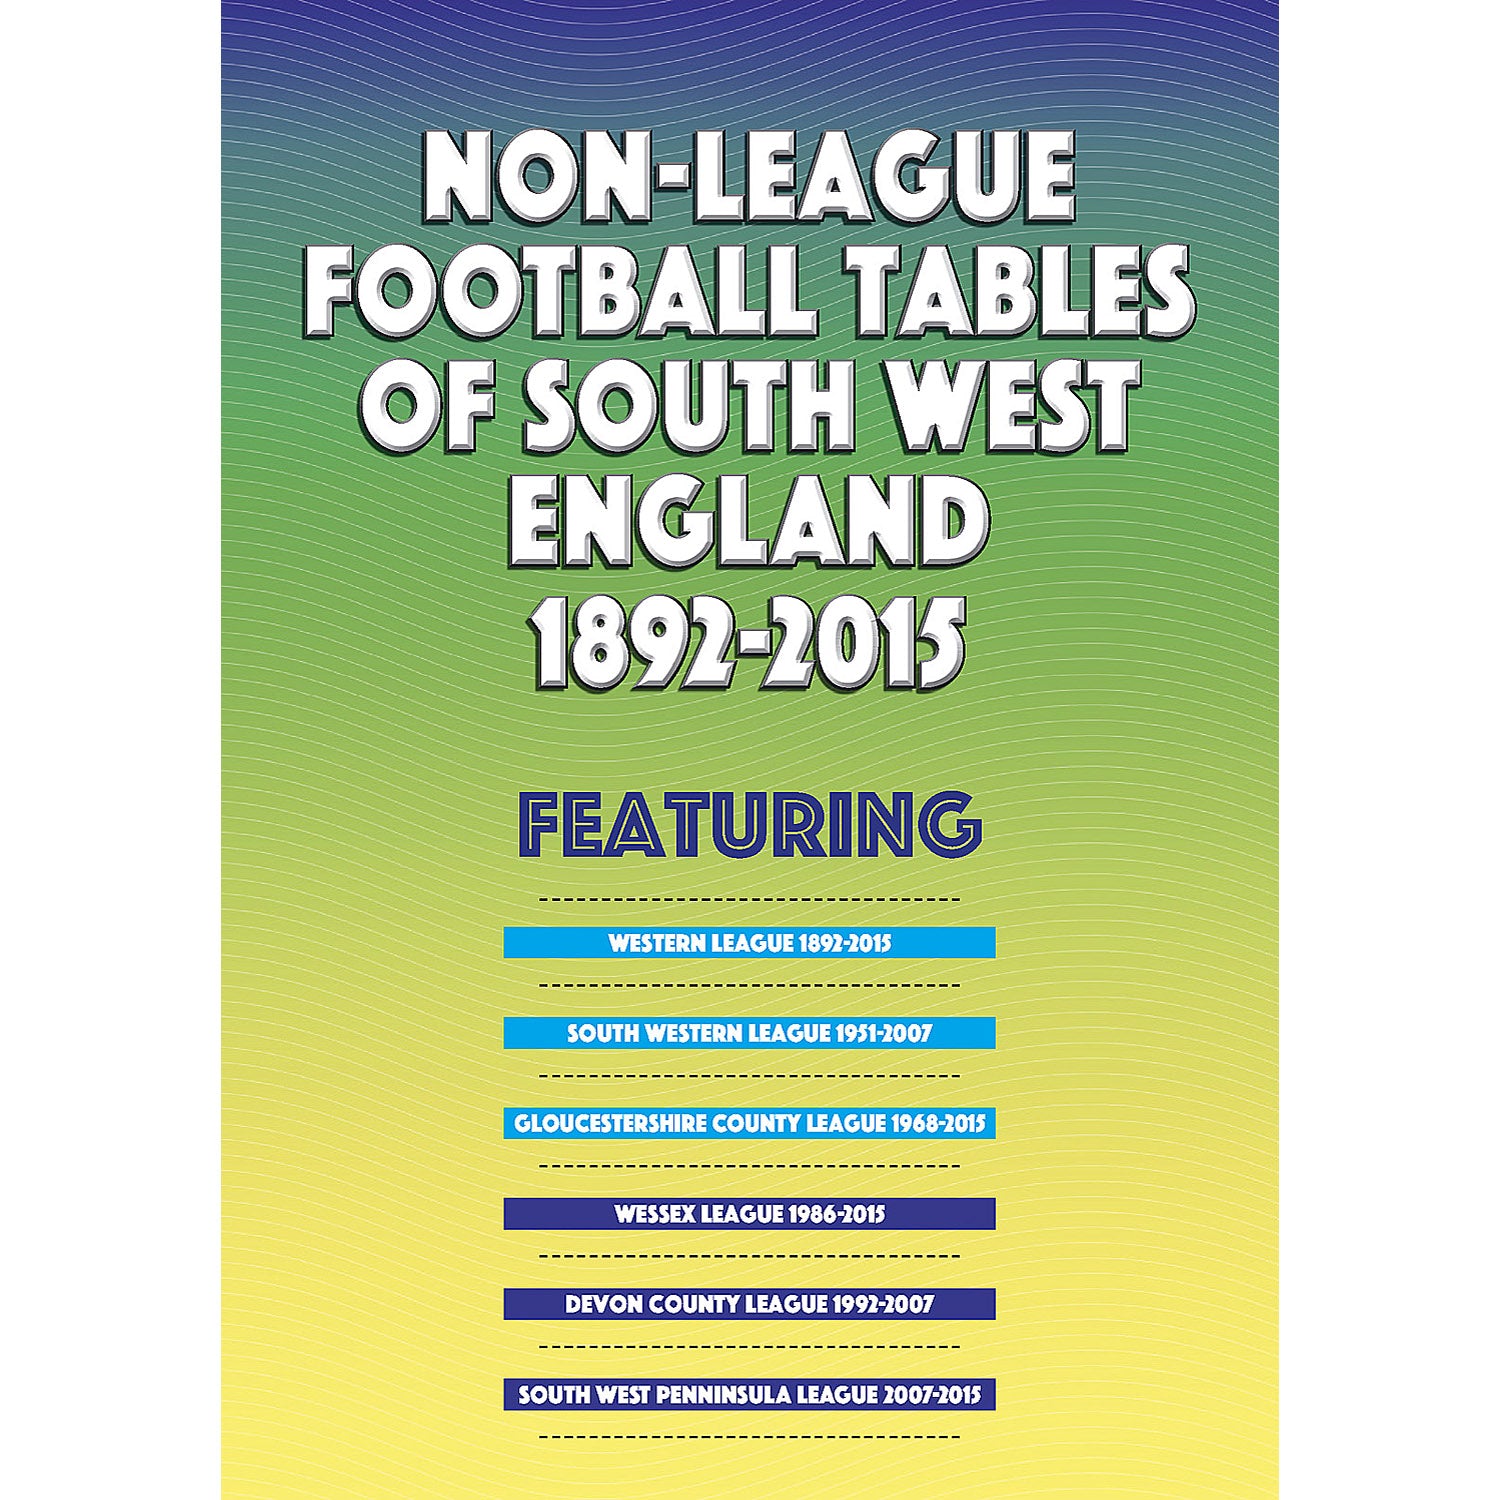 Non-League Football Tables of South West England 1892-2015